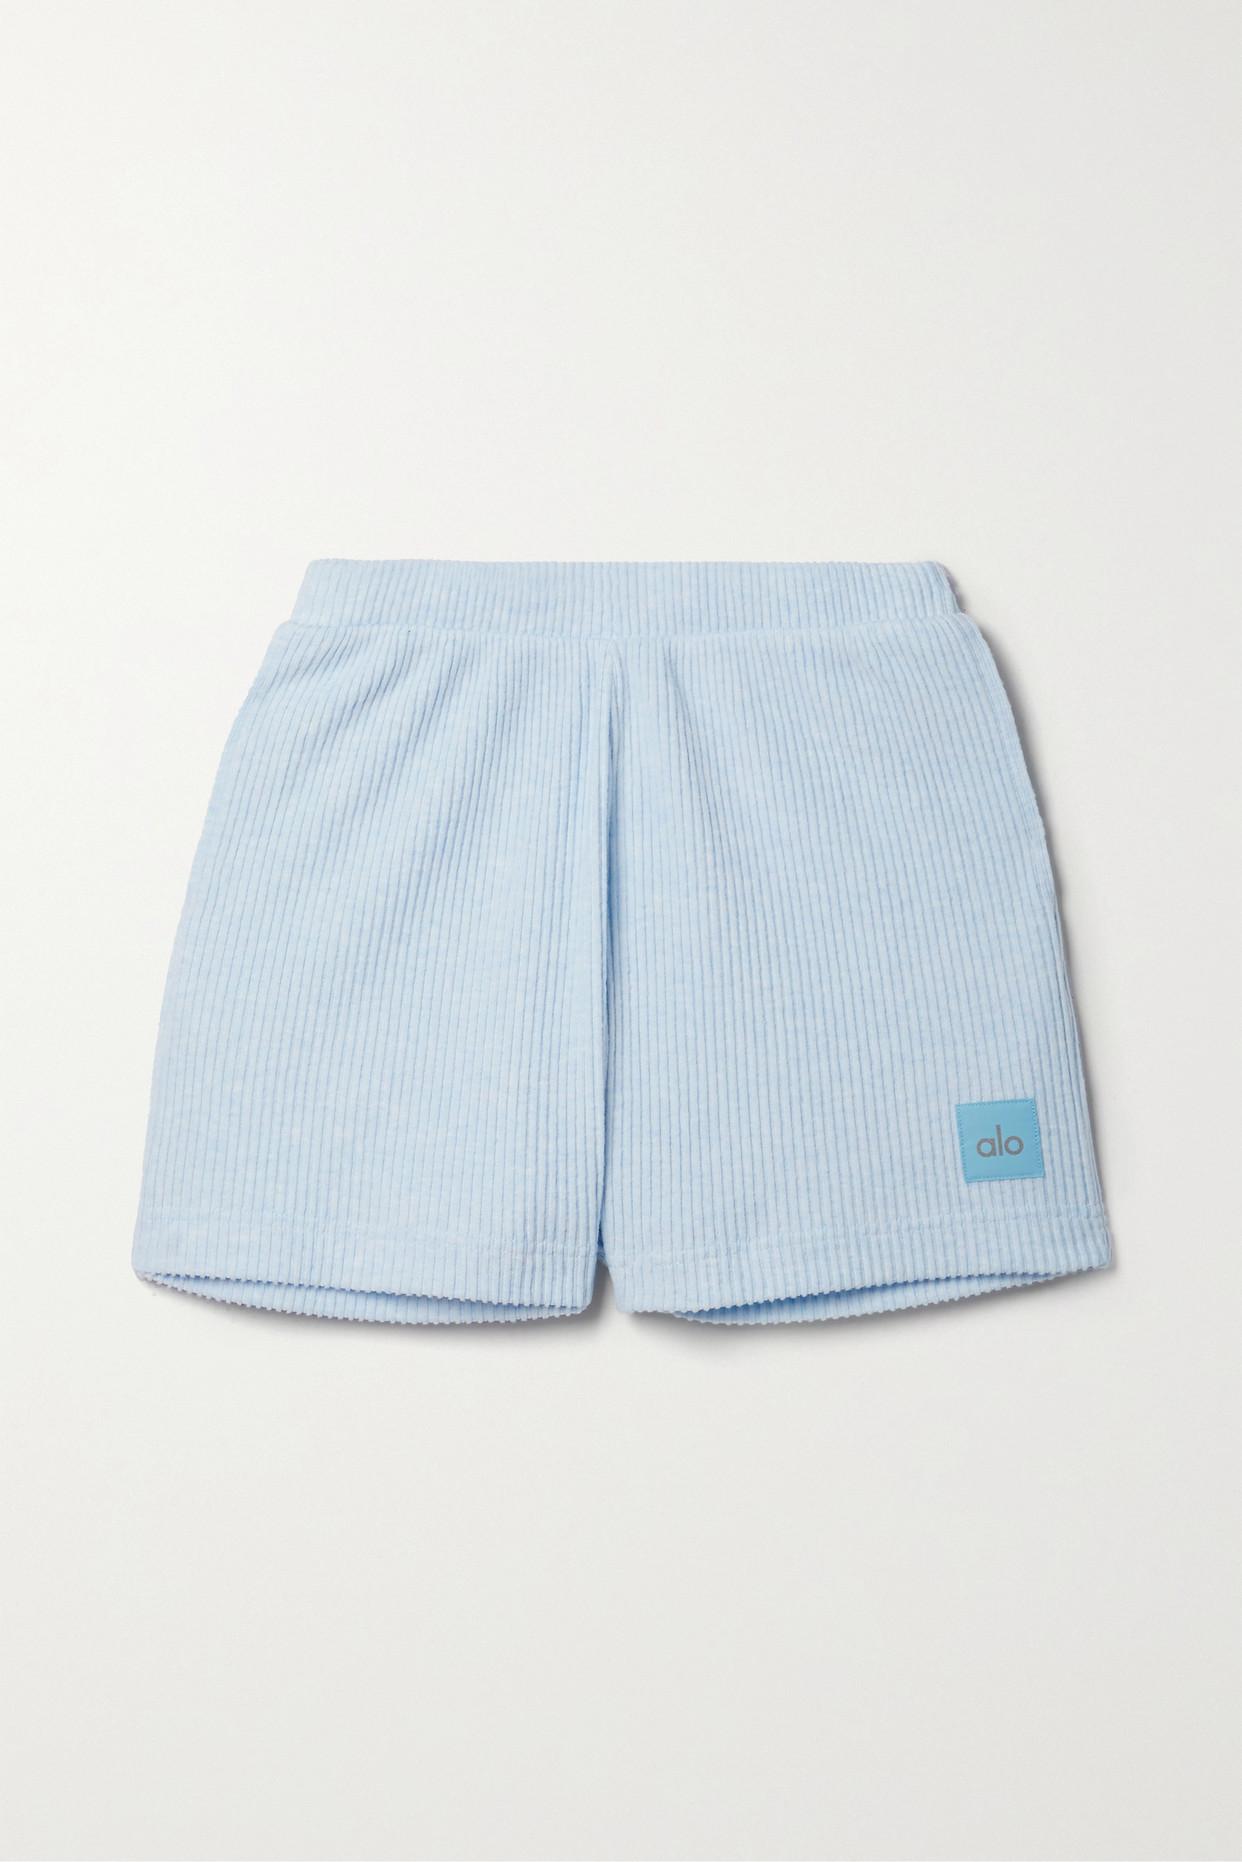 Alo Yoga Muse Ribbed-knit Shorts in Blue | Lyst